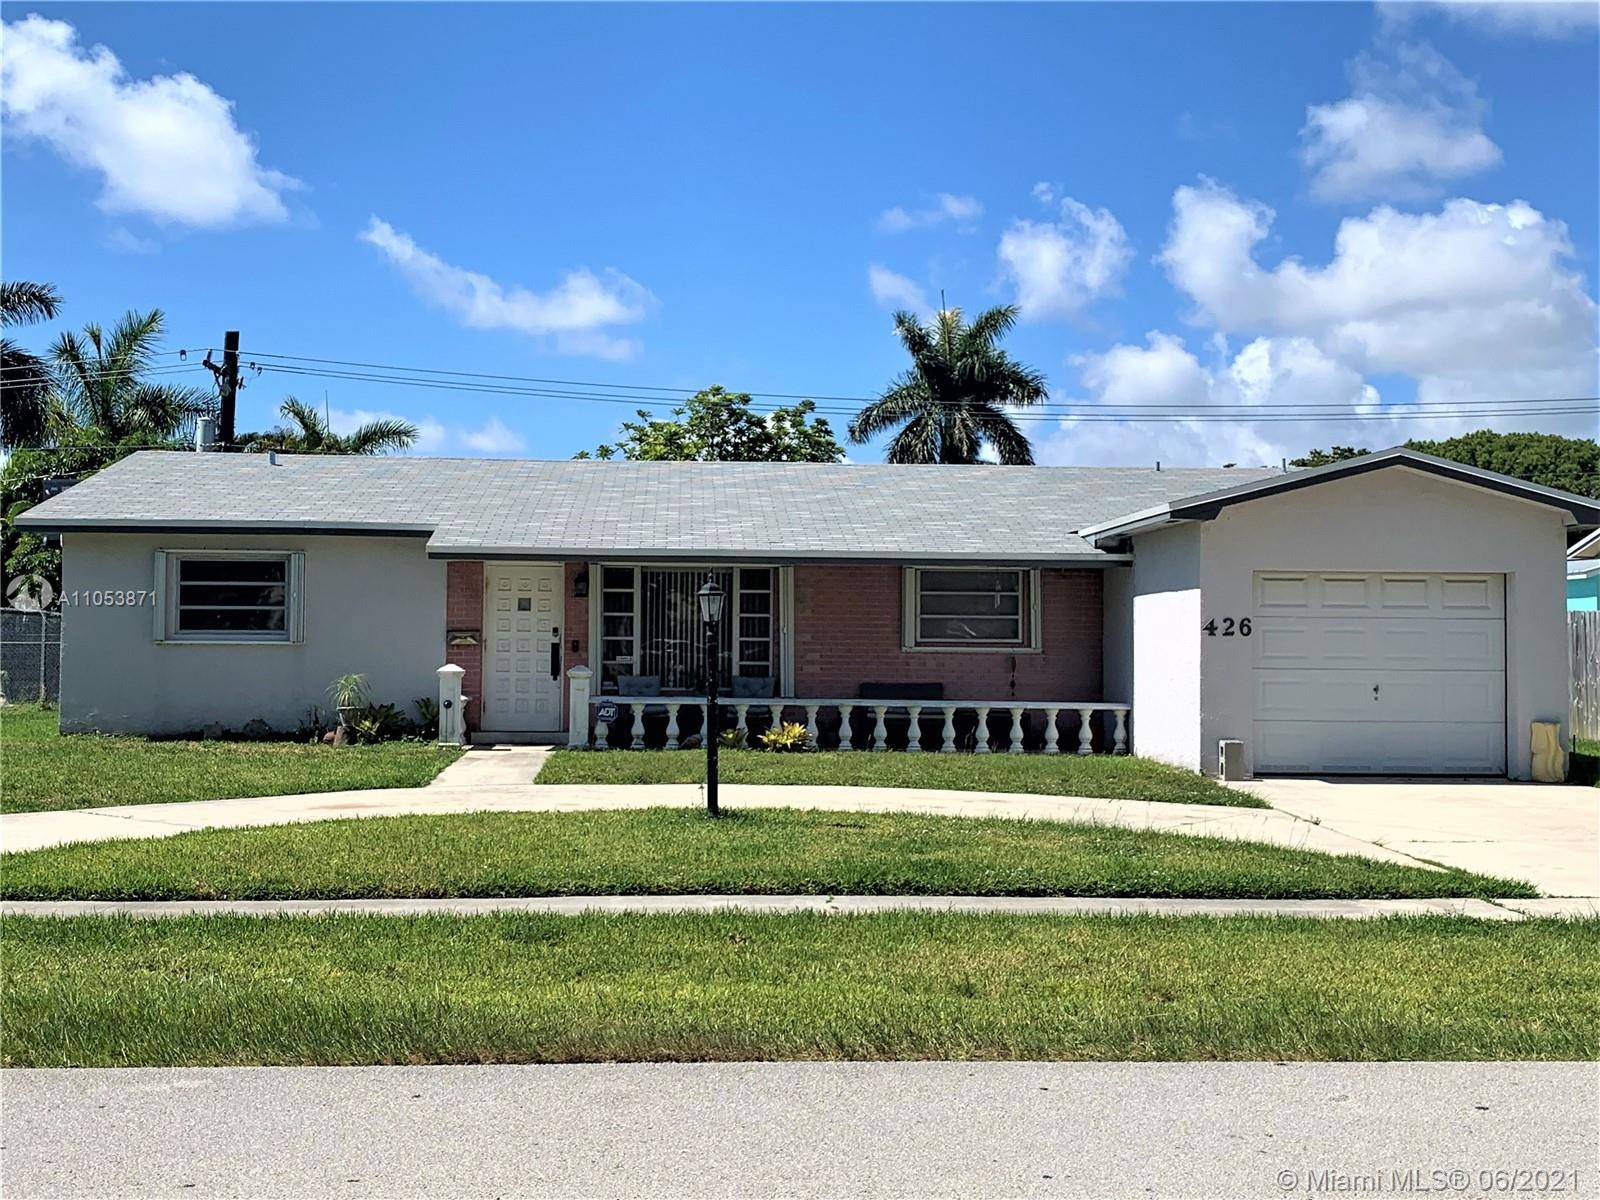 Welcome to the community of Ocean View in Dania Beach a friendly community on a quite street.